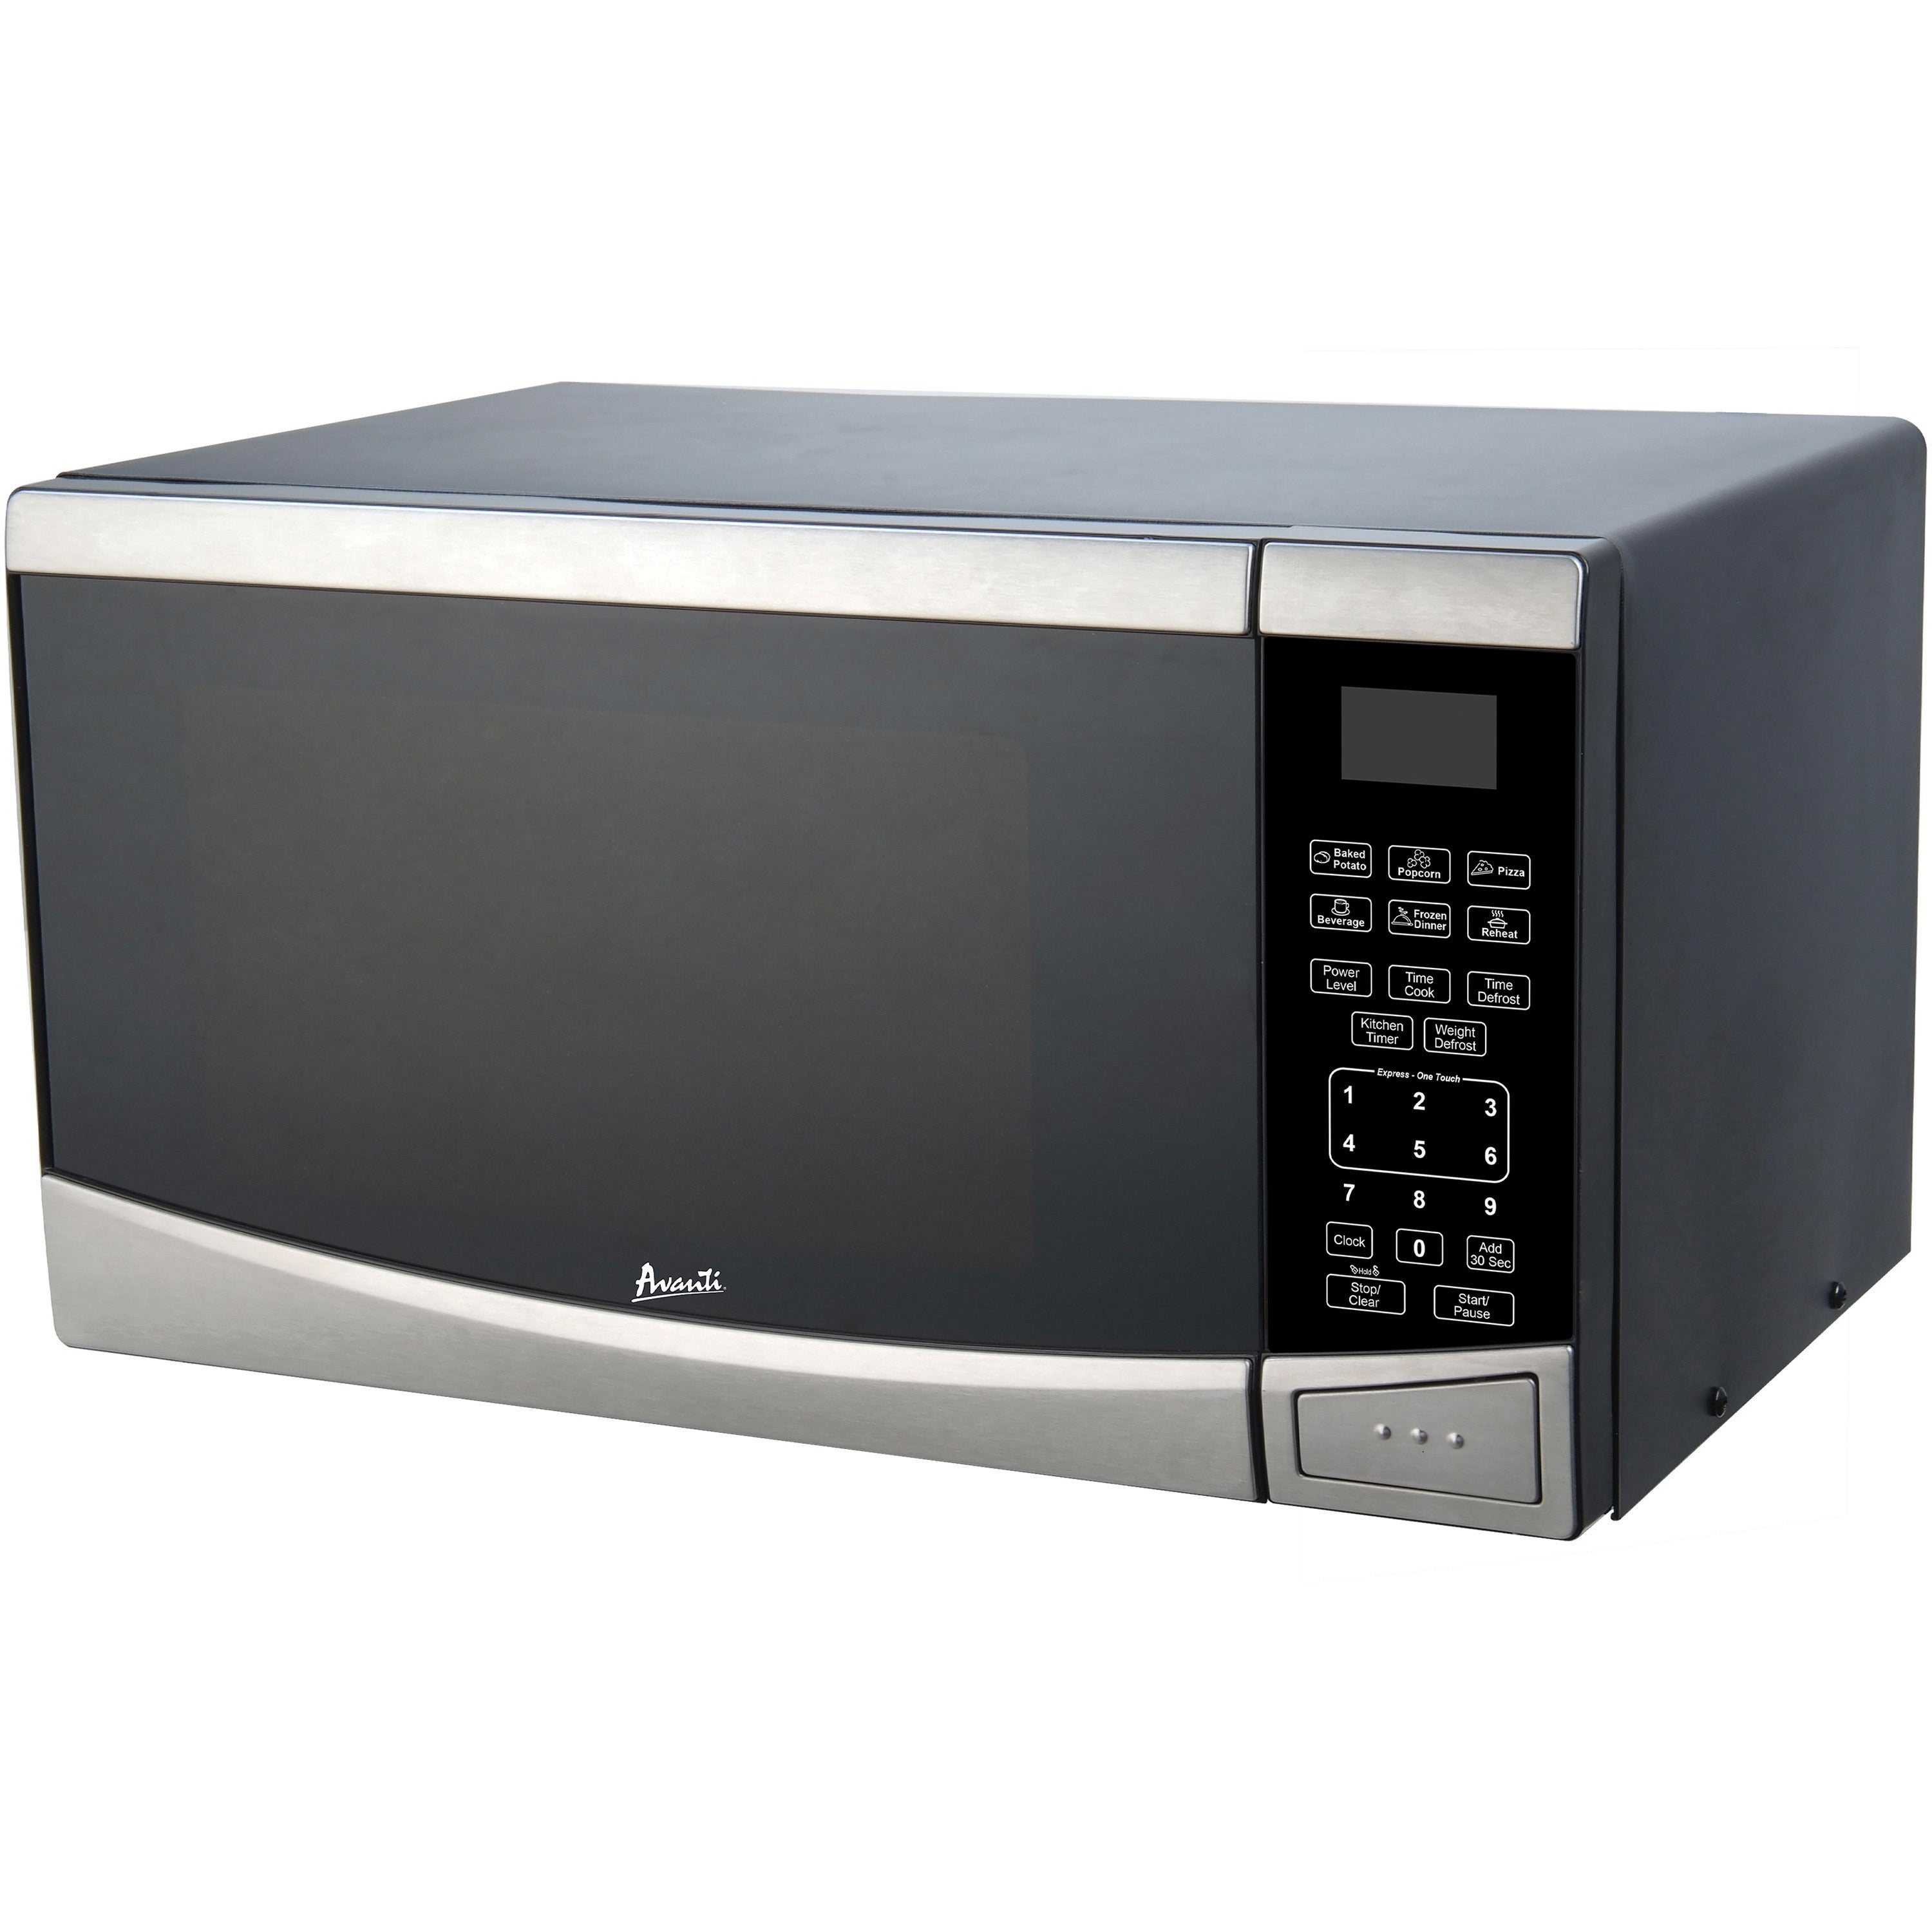 Avanti Model MT09V3S - 0.9 cubic foot Touch Microwave - Single - 19" Width - 0.9 ft Capacity - Microwave - 10 Power Levels - 900 W Microwave Power - 120 V AC - Countertop - Stainless Steel